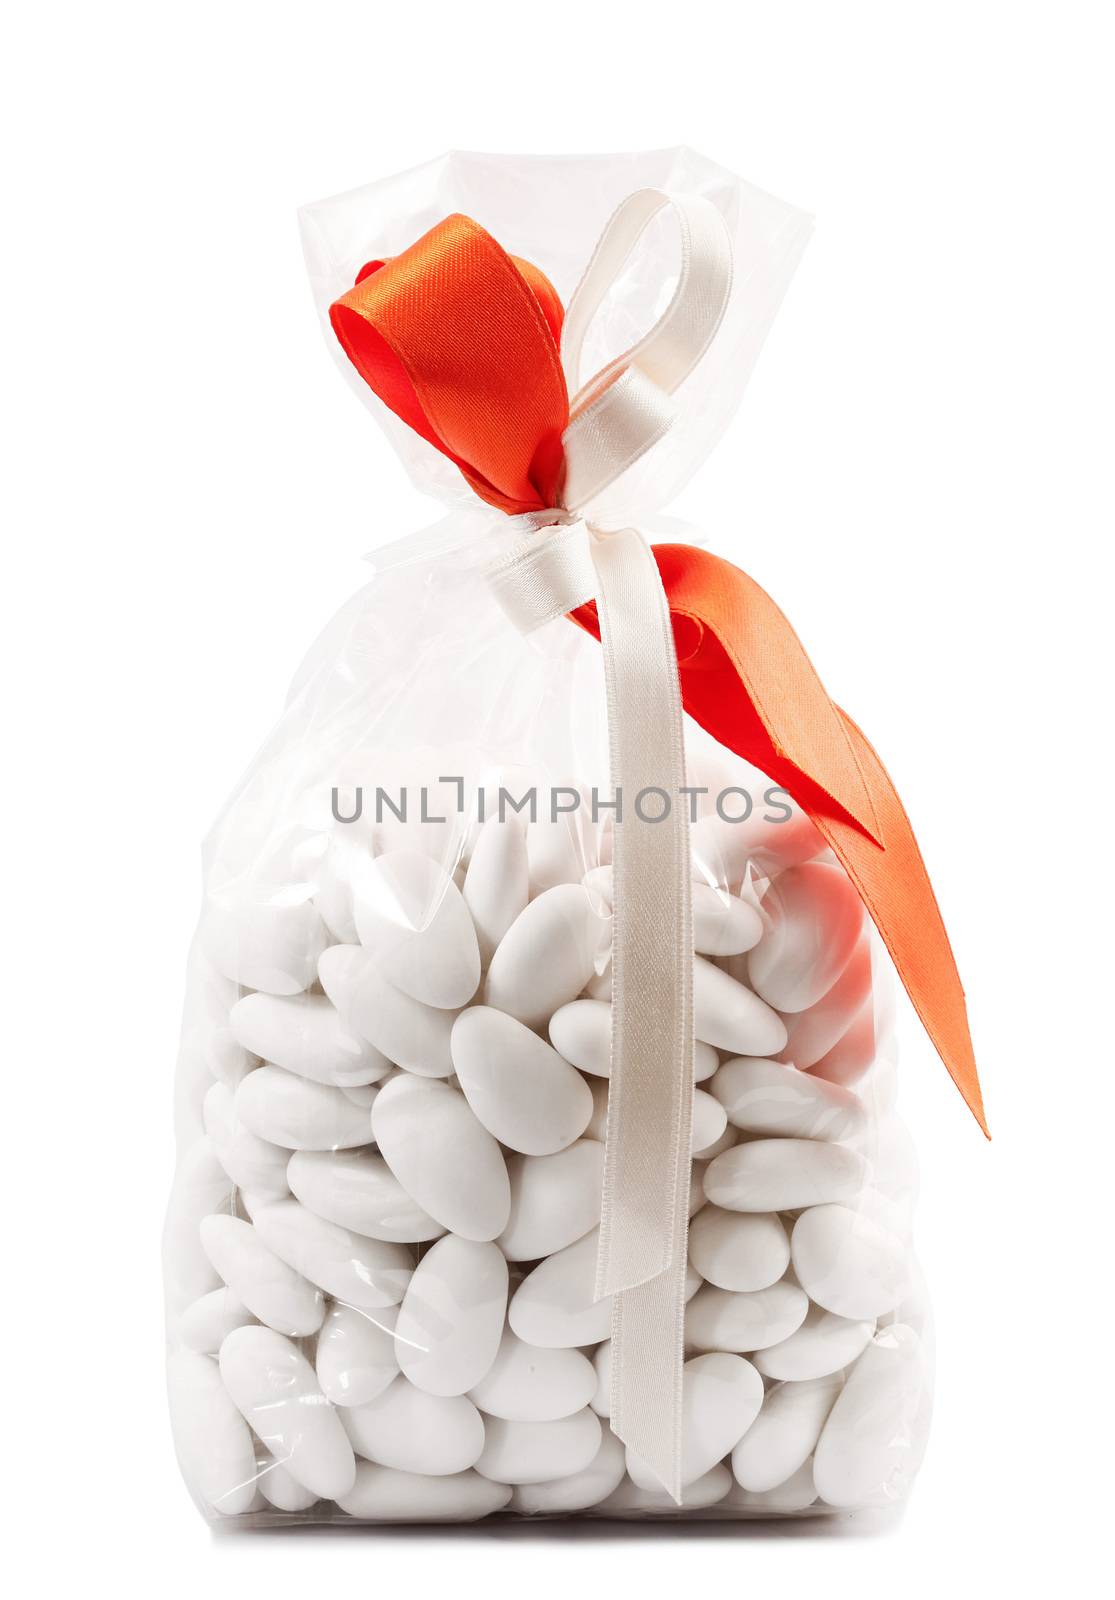 bag of comfits in white background by photobeps